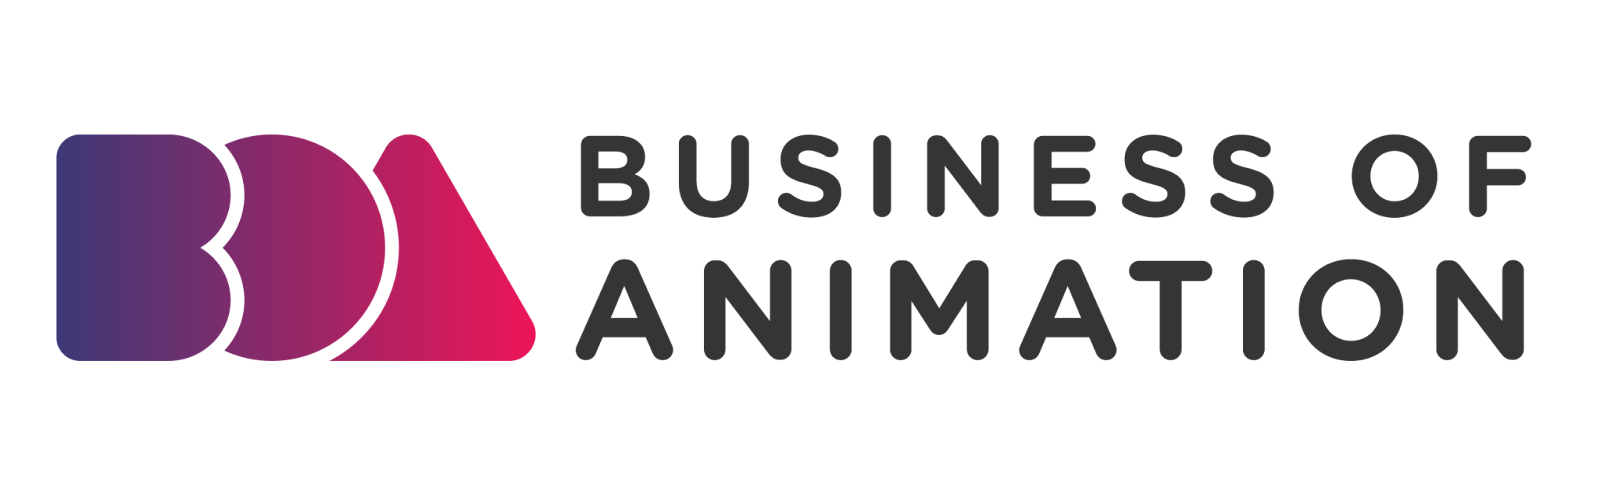 the business of animation is the perfect animation resource for freelance animators who want to kickstart their career